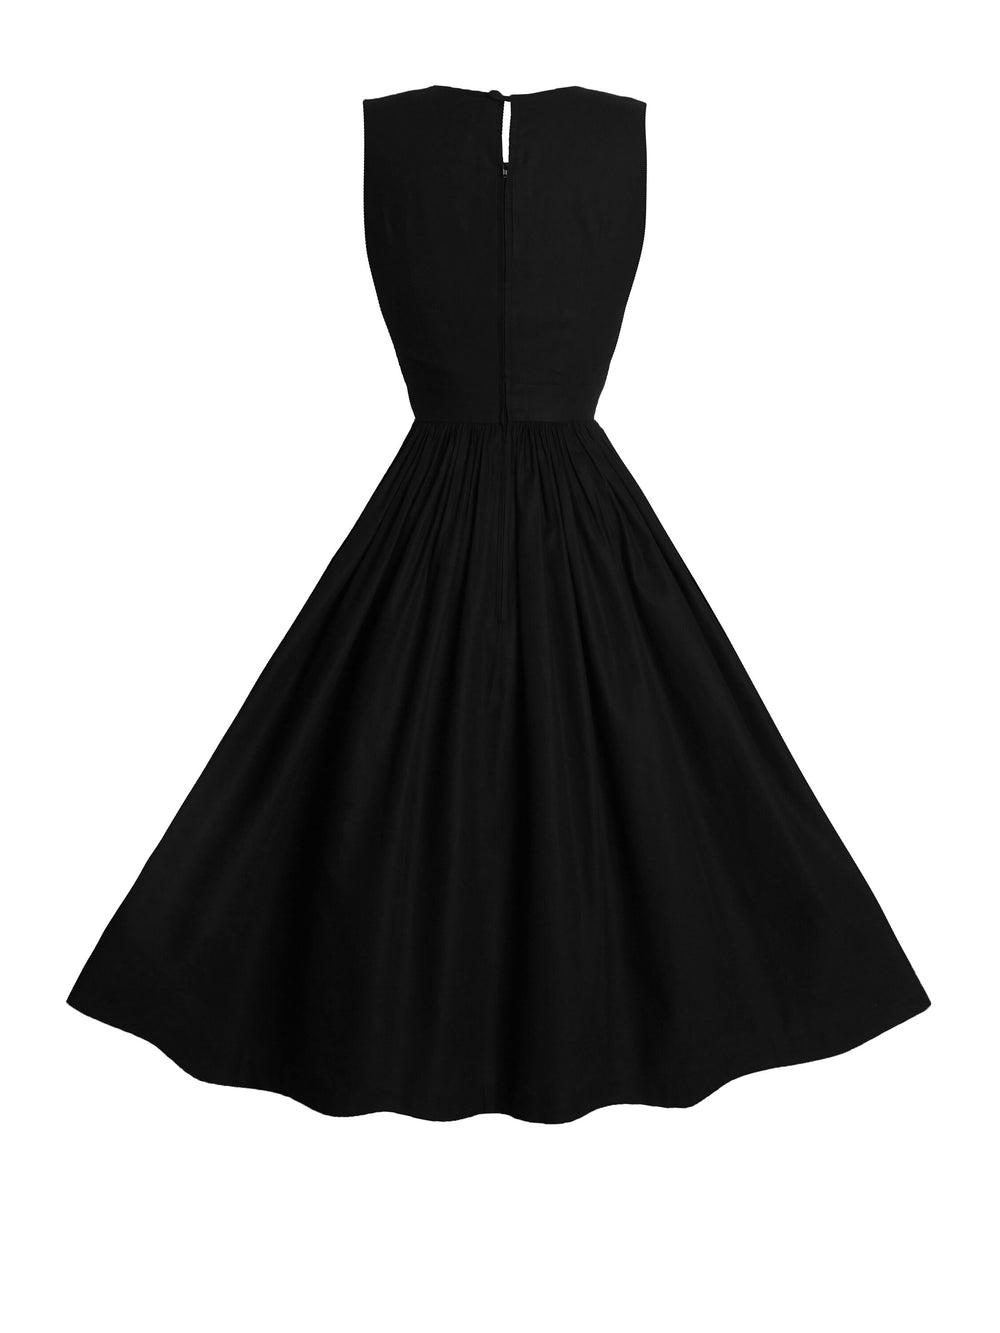 RTS - Size S - Clarence Dress in Raven Black Cotton